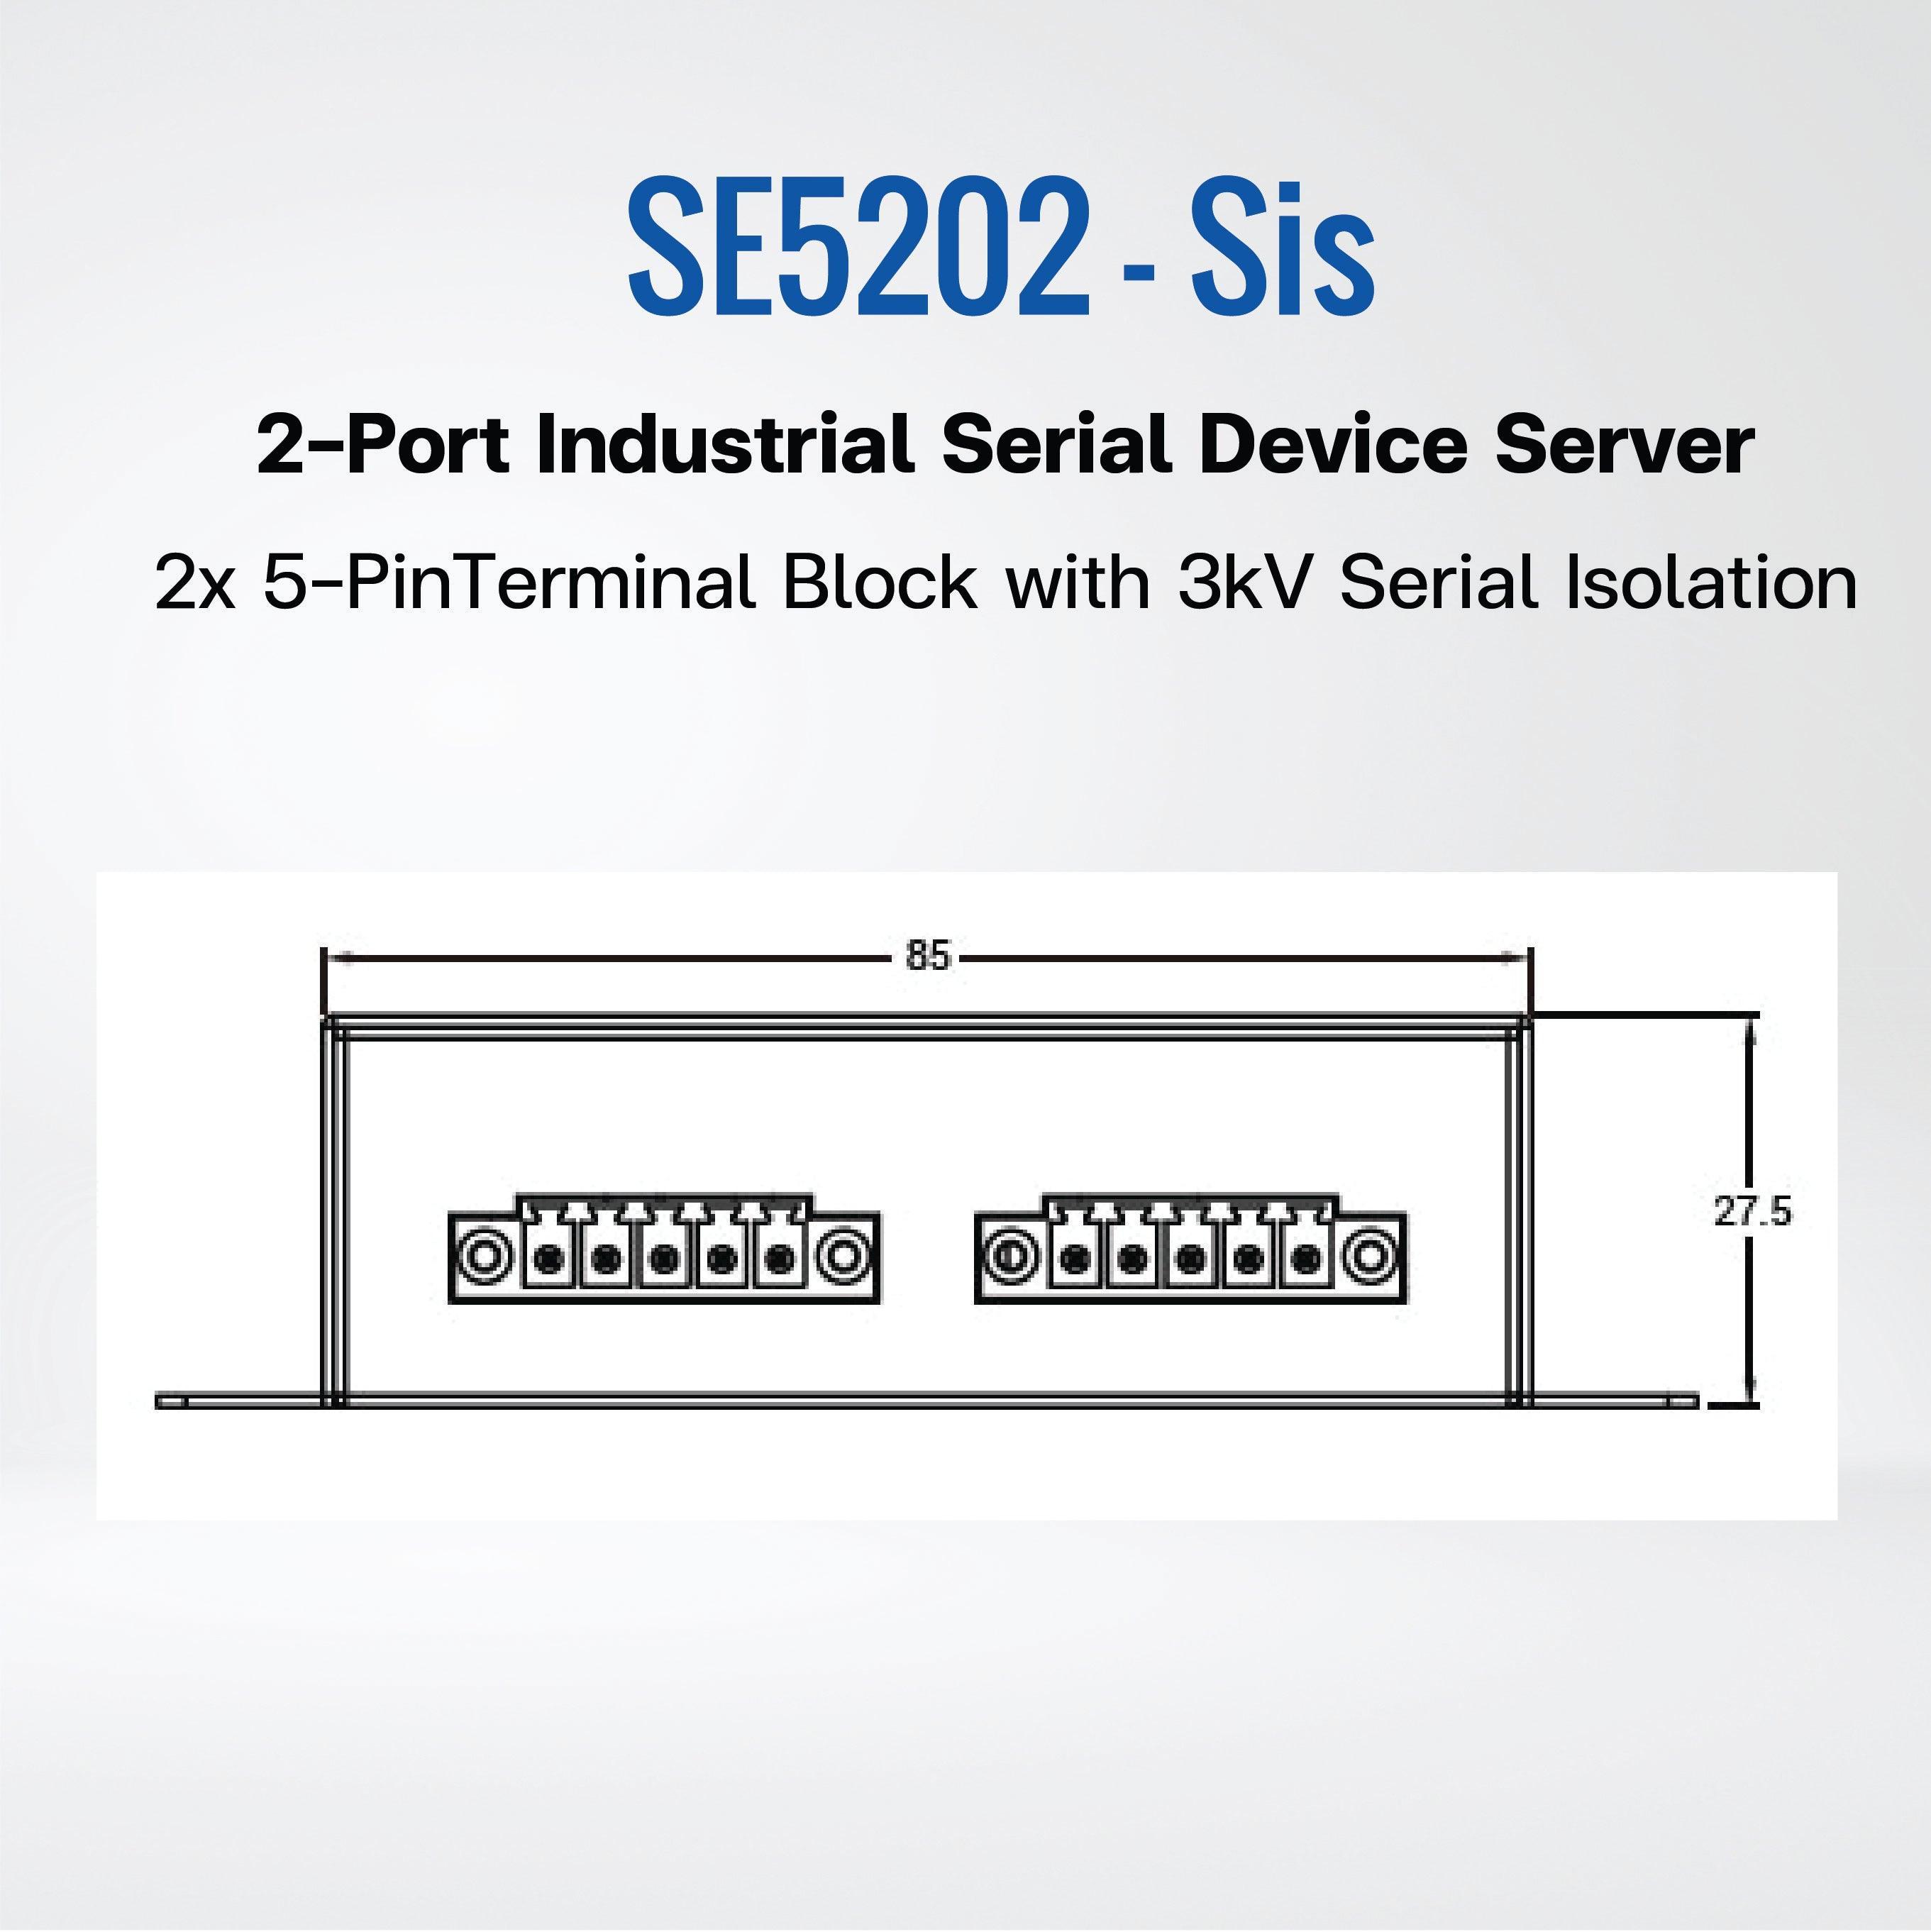 SE5202-Sis Compact 2-Port Industrial Serial Device Server, Field-Mount - Riverplus